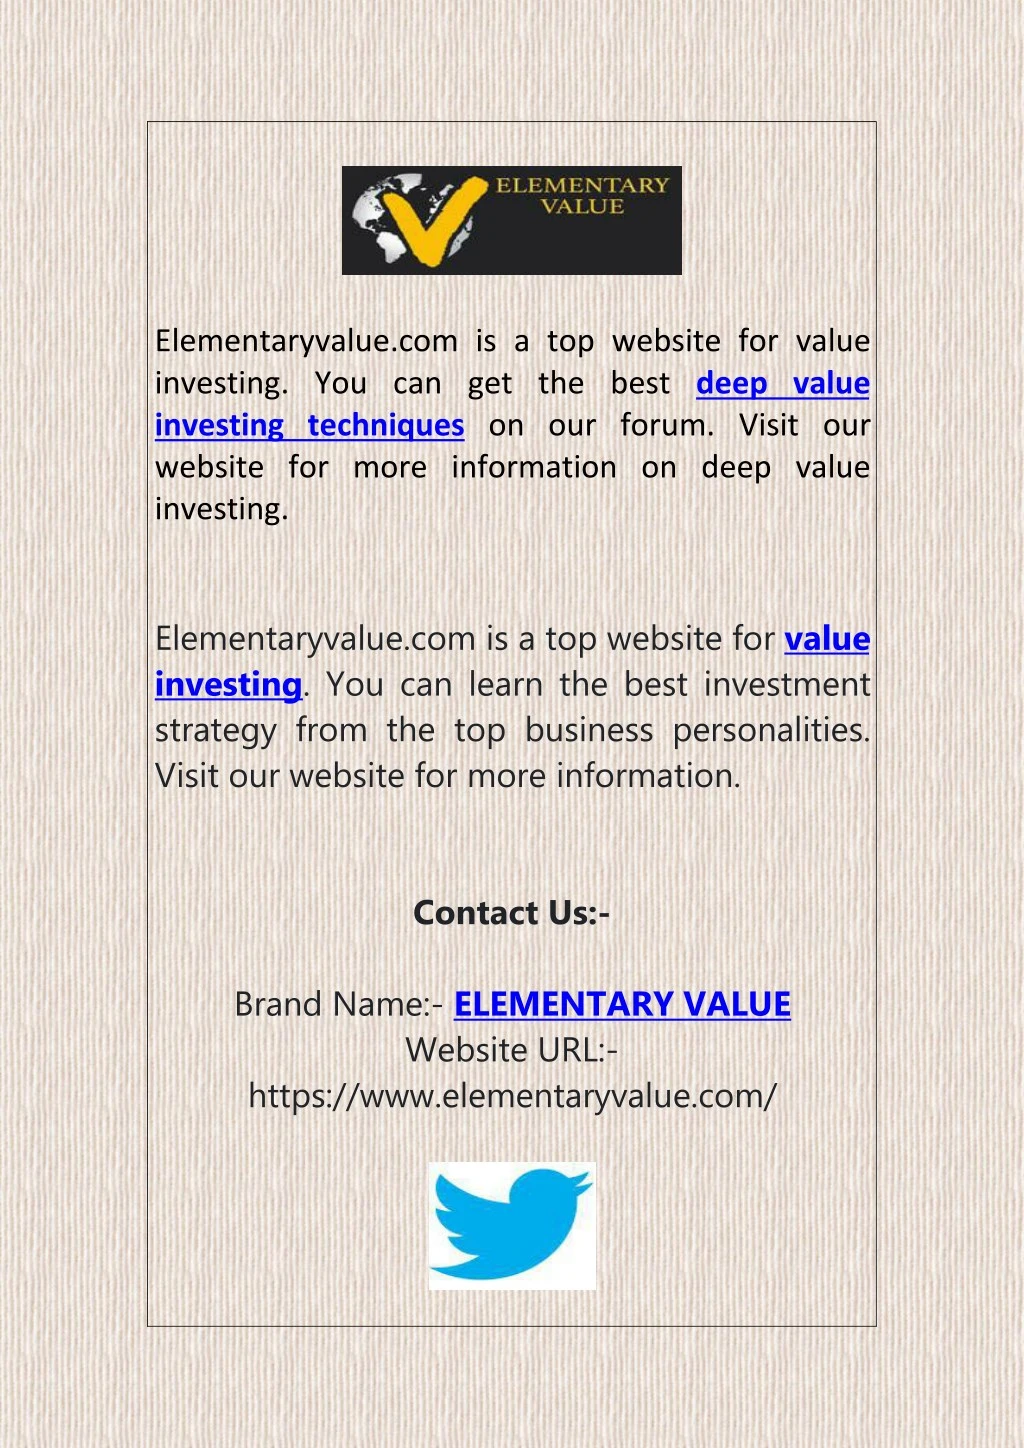 elementaryvalue com is a top website for value